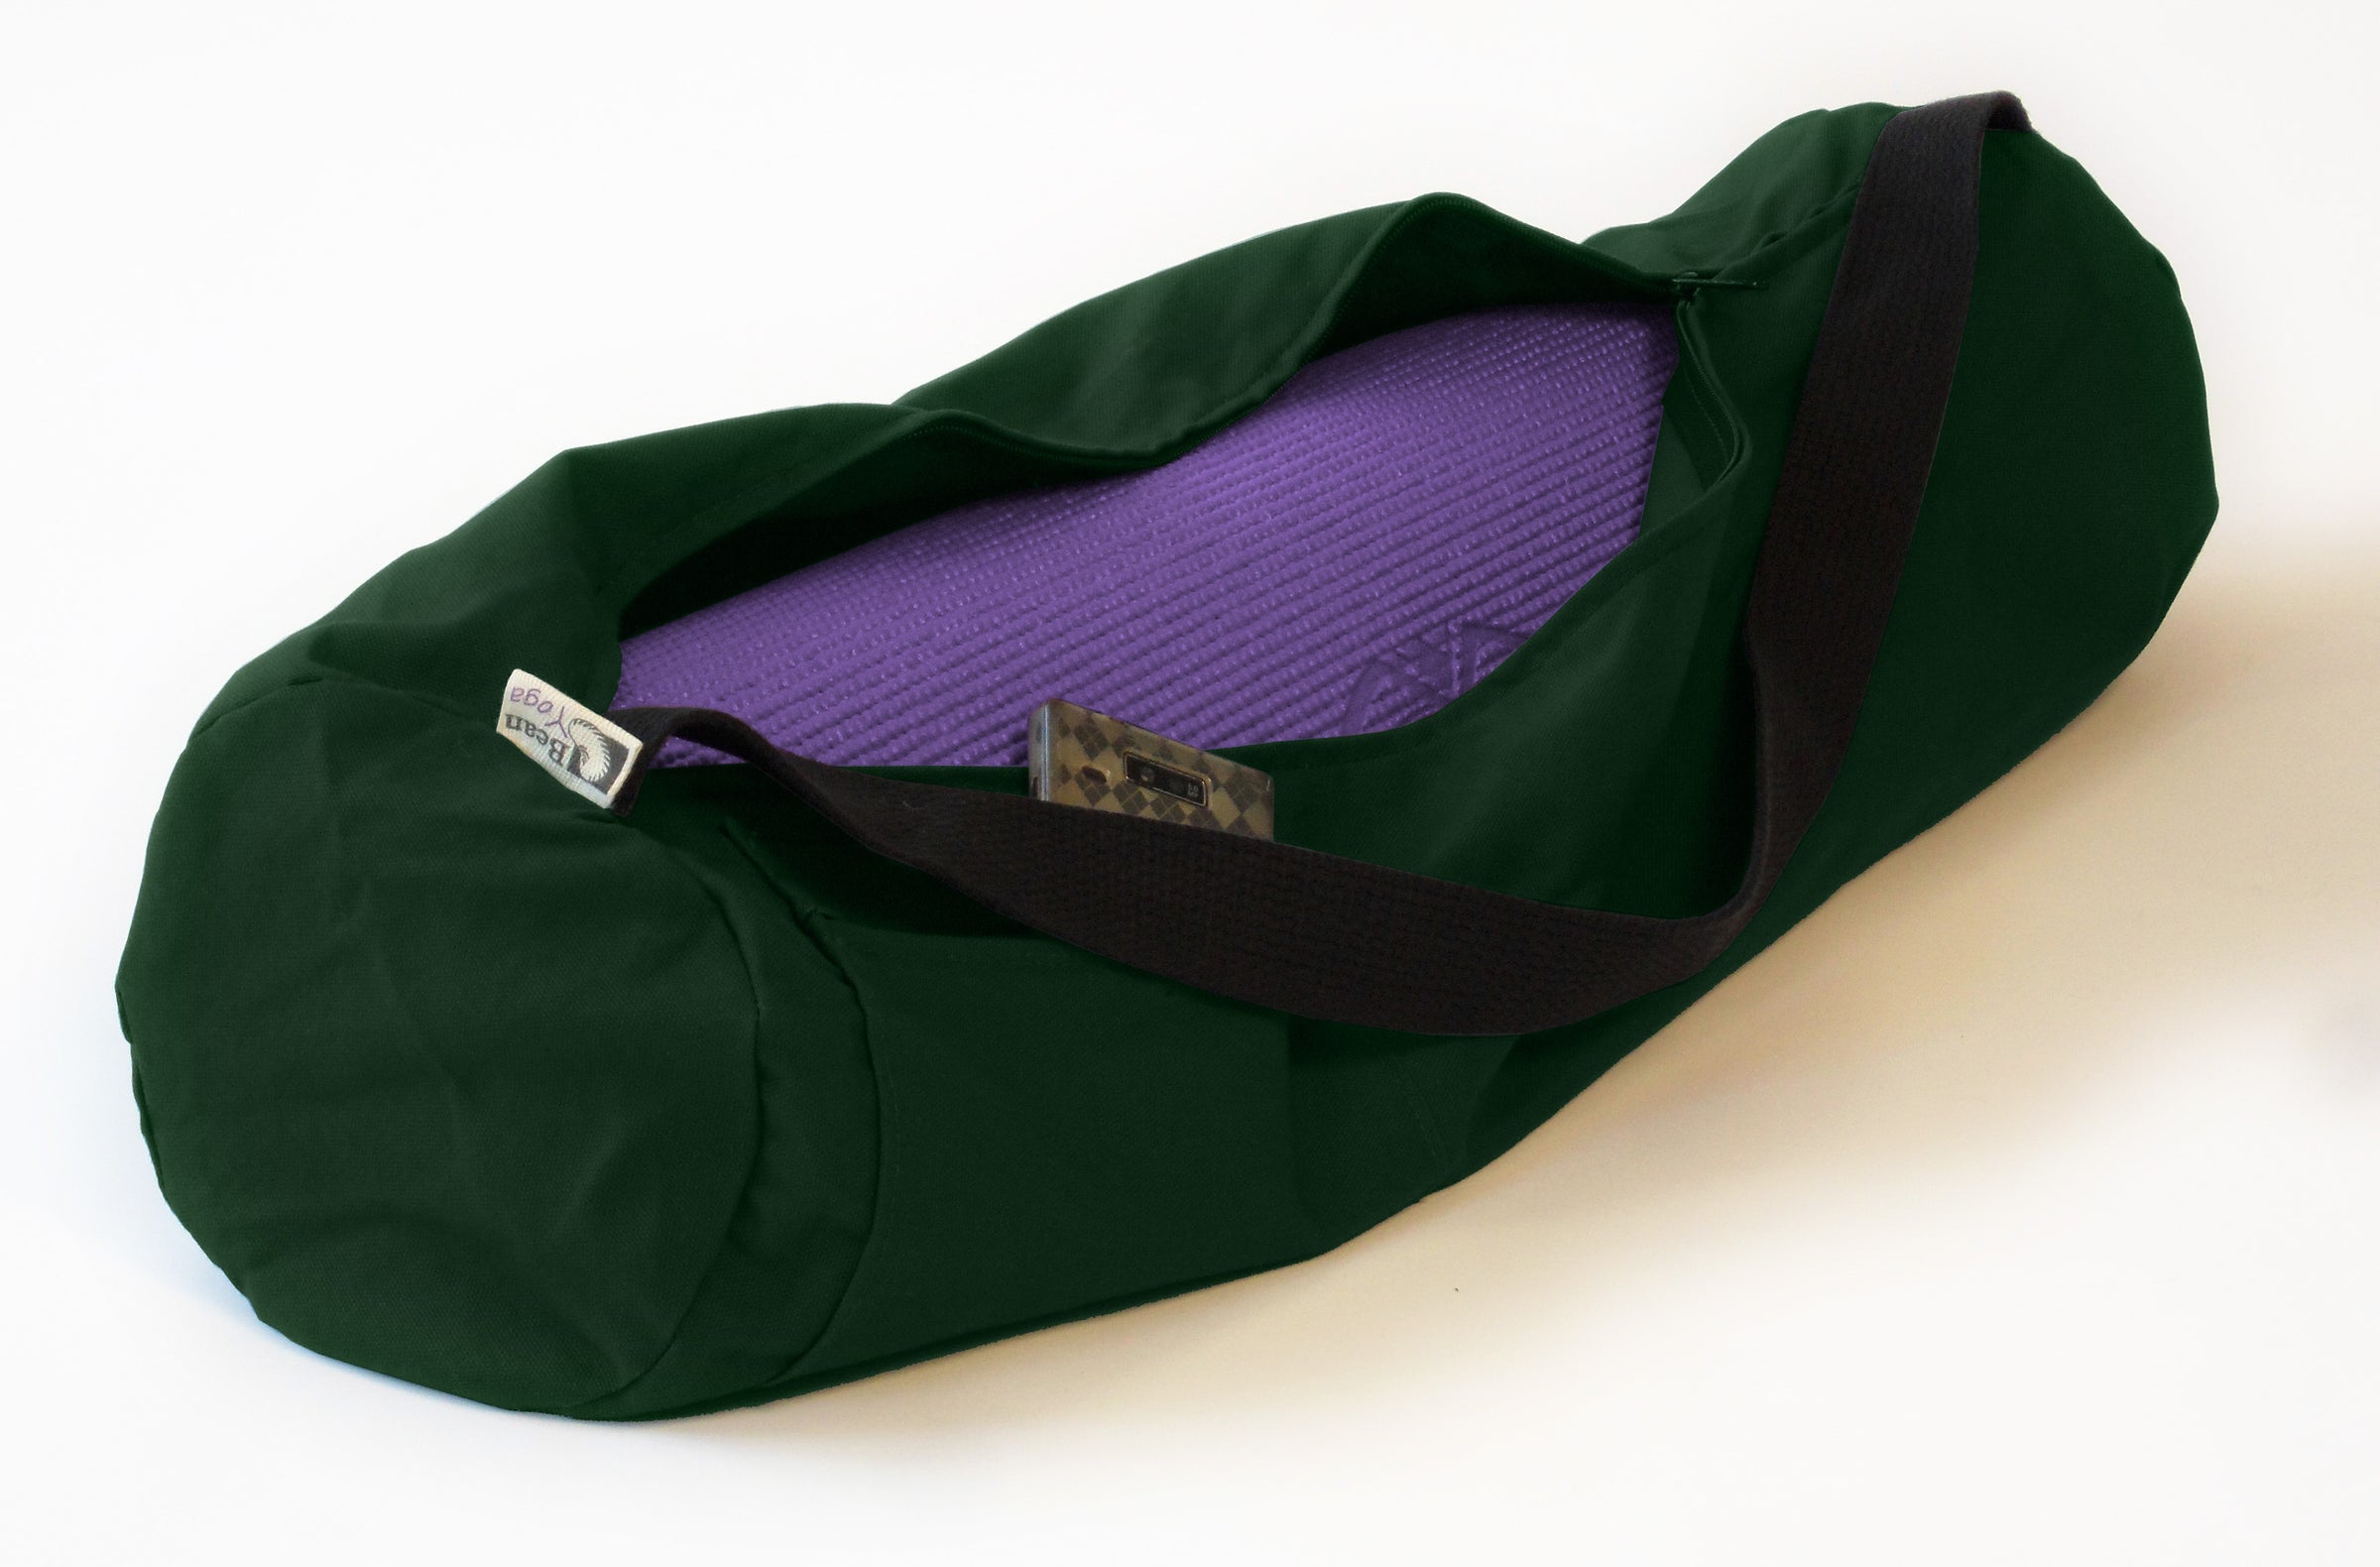 New Indian Green Hand Block Yoga Mat Bag Carrier Gym Bags With